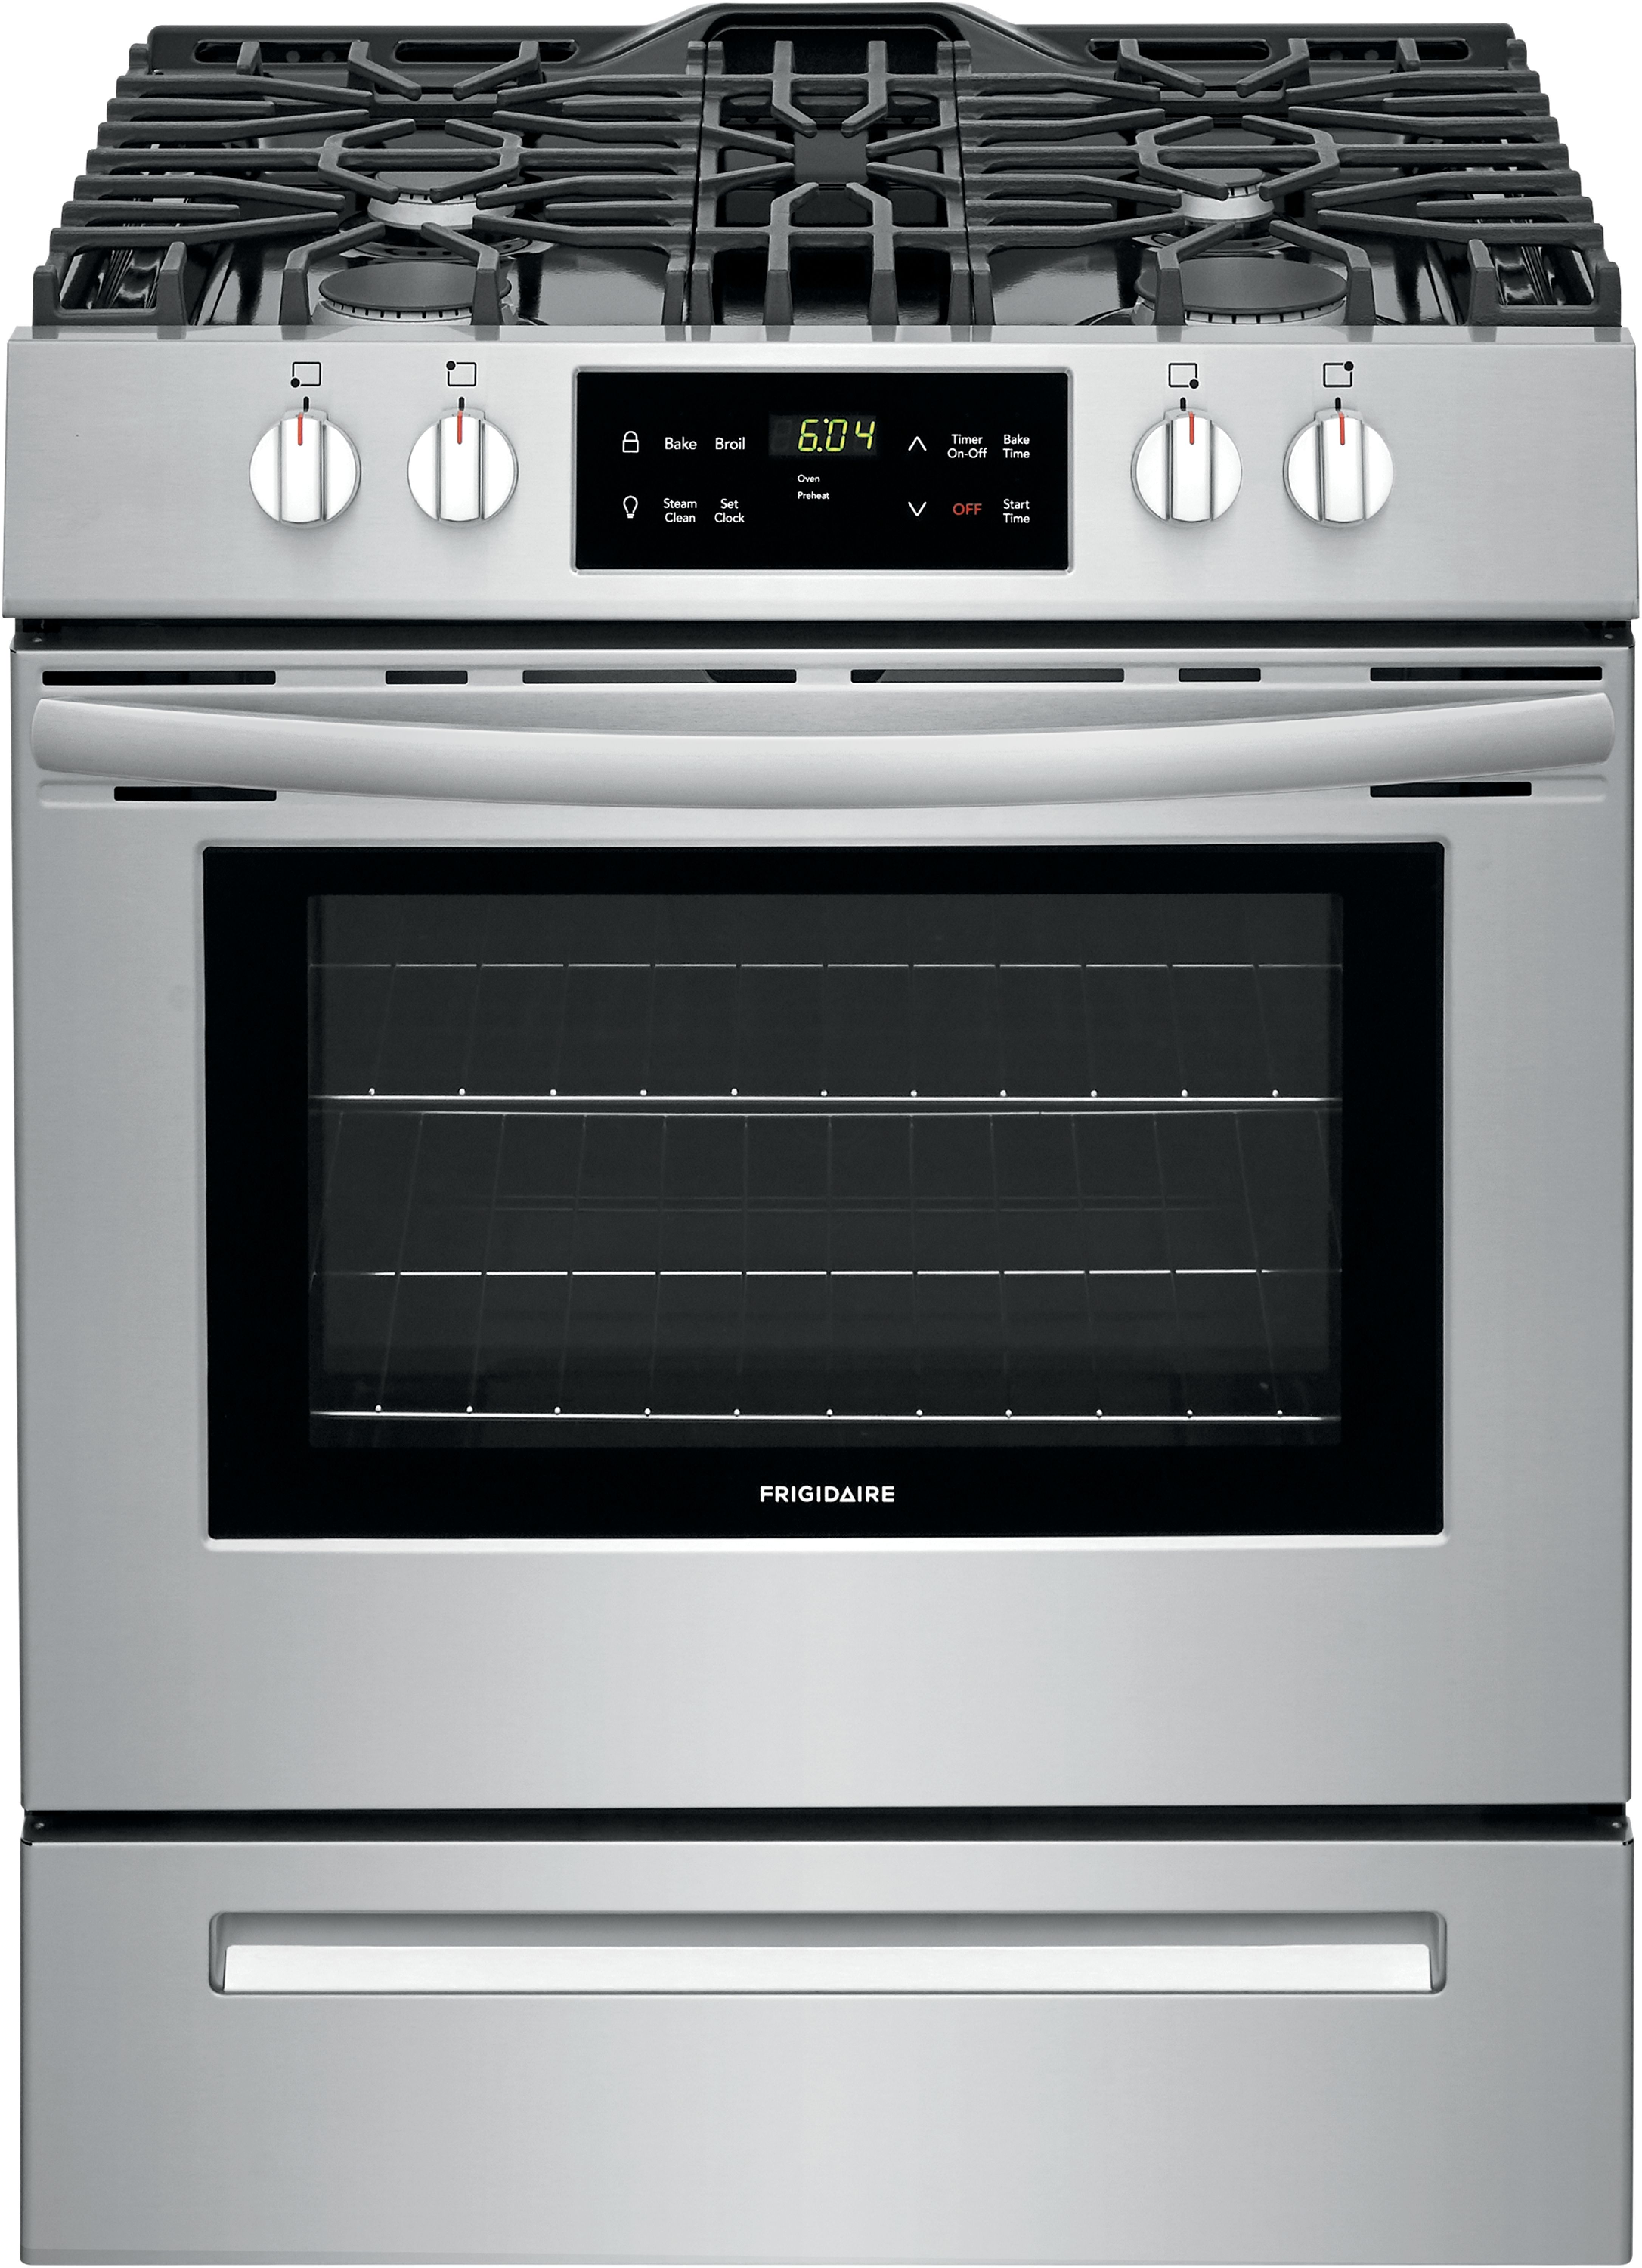 Frigidaire® 30" Stainless Steel Free Standing Gas Range-FFGH3051VS